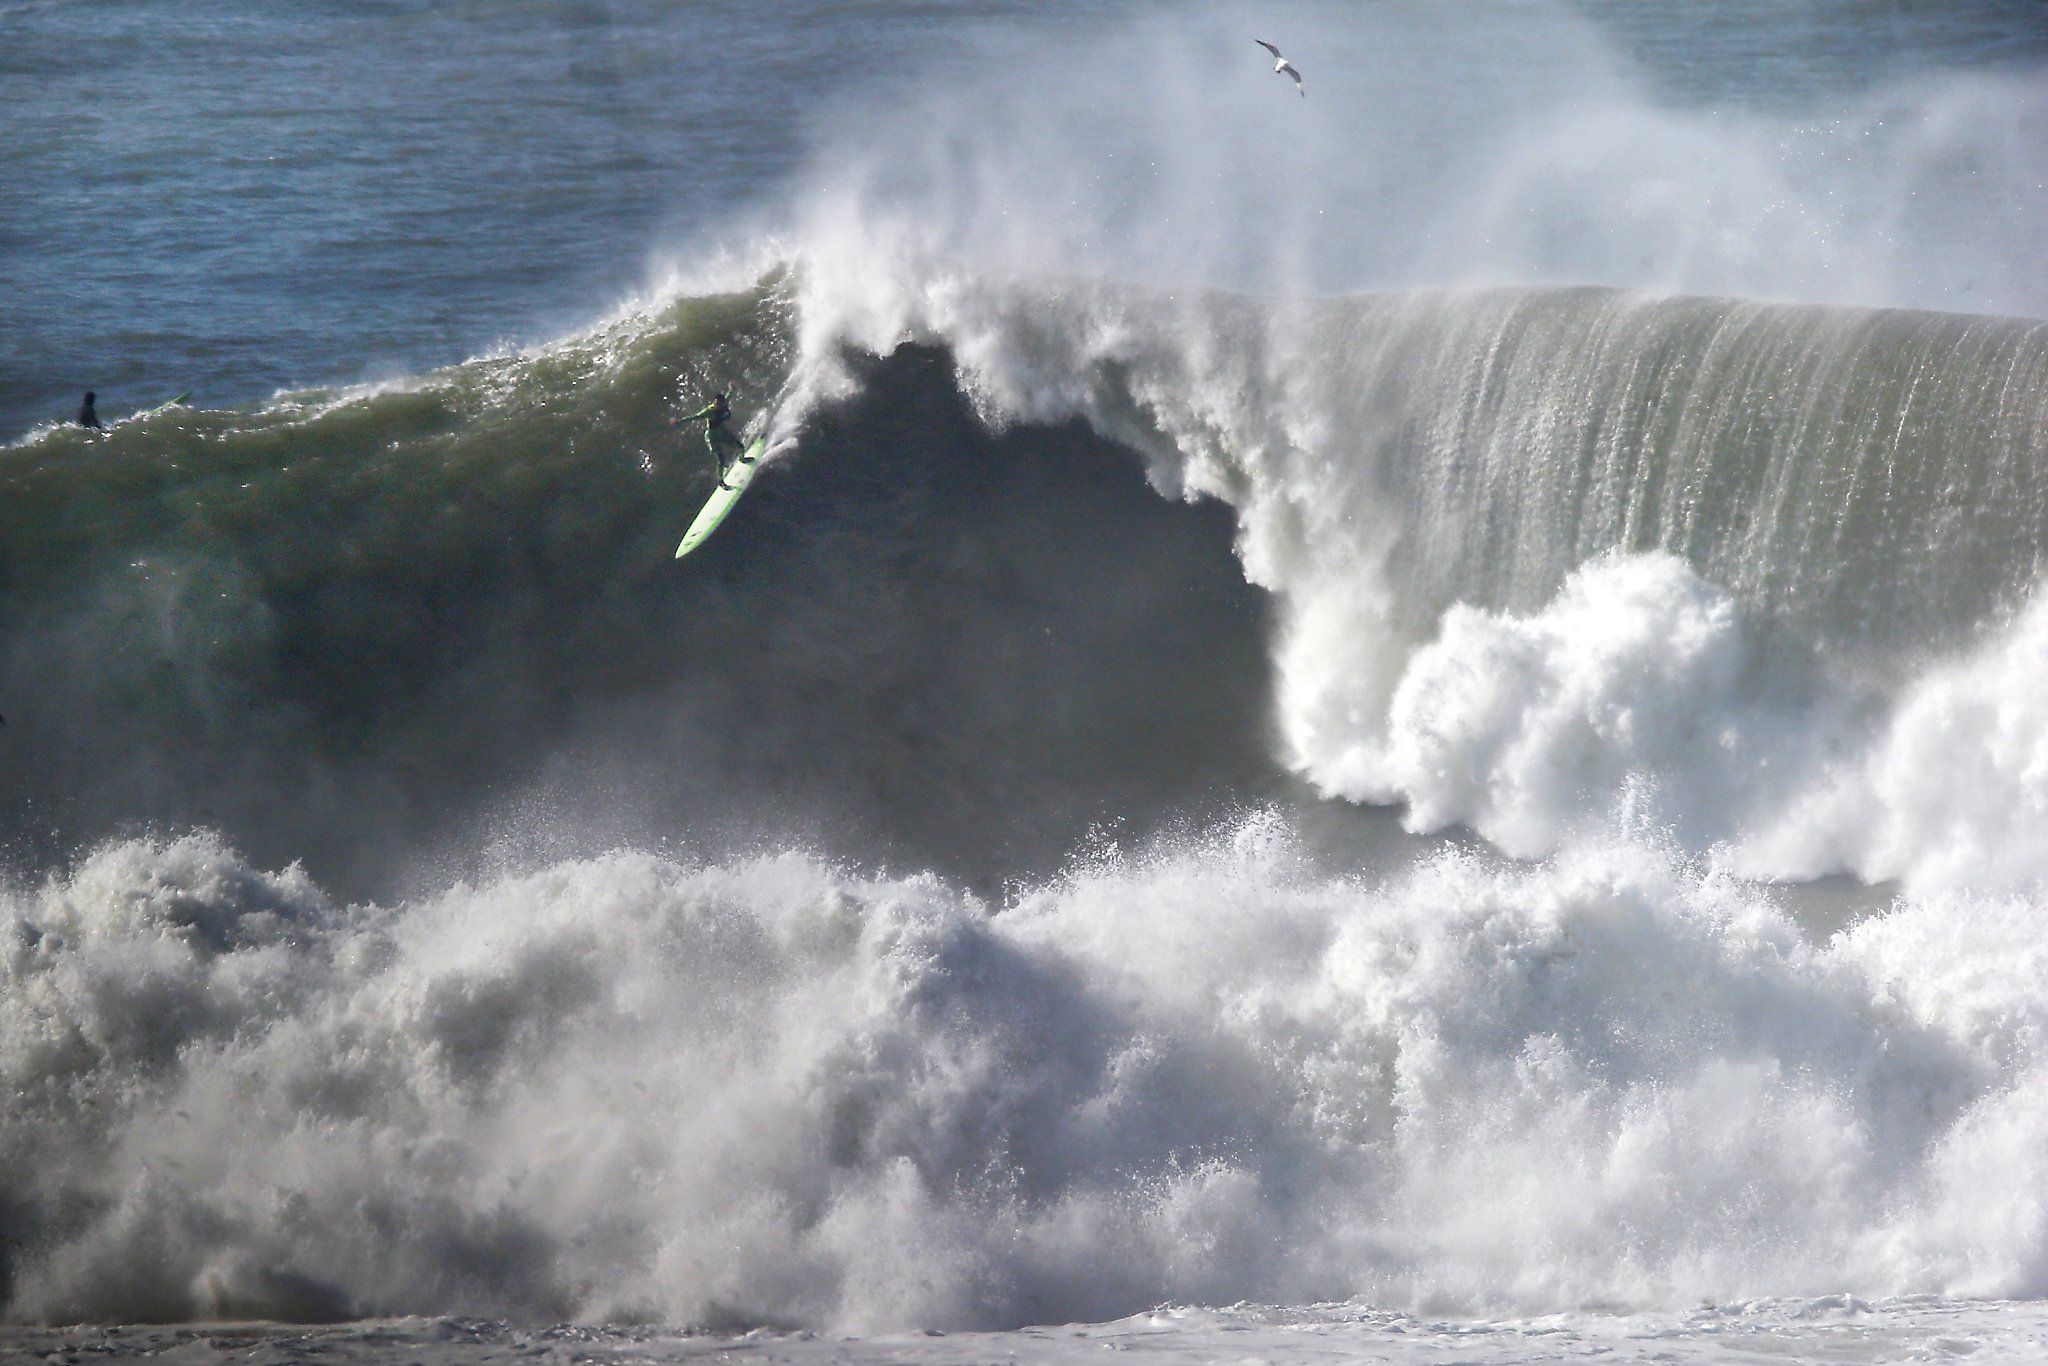 Massive waves 25 to 40 feet expected to Bay Area storms